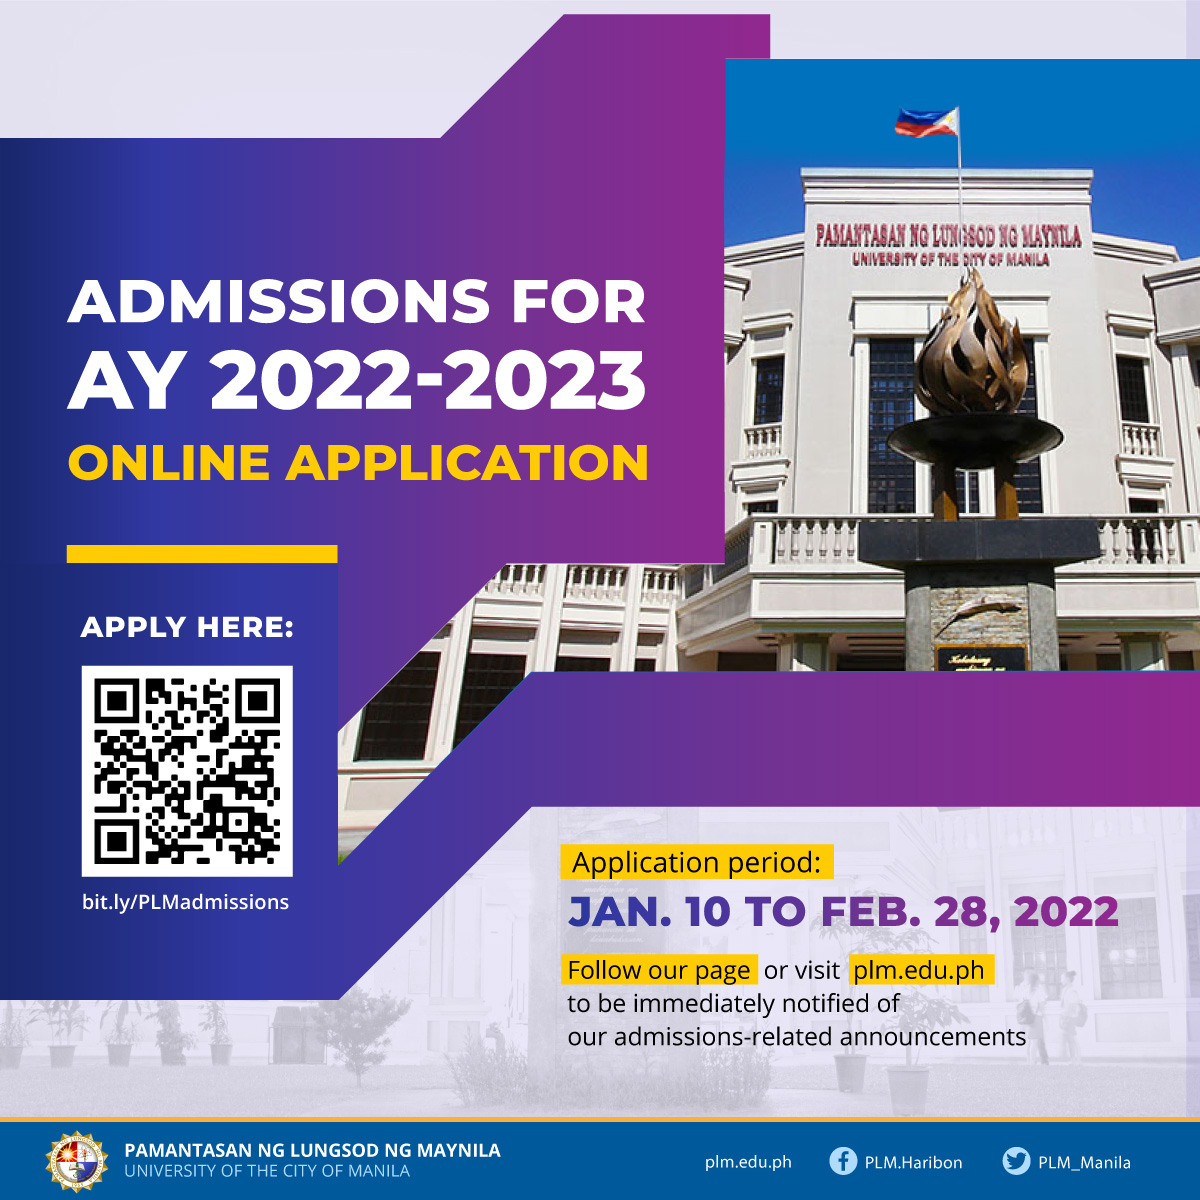 Application for AY 2022-2023 admissions open from Jan. 10-Feb. 28, 2022